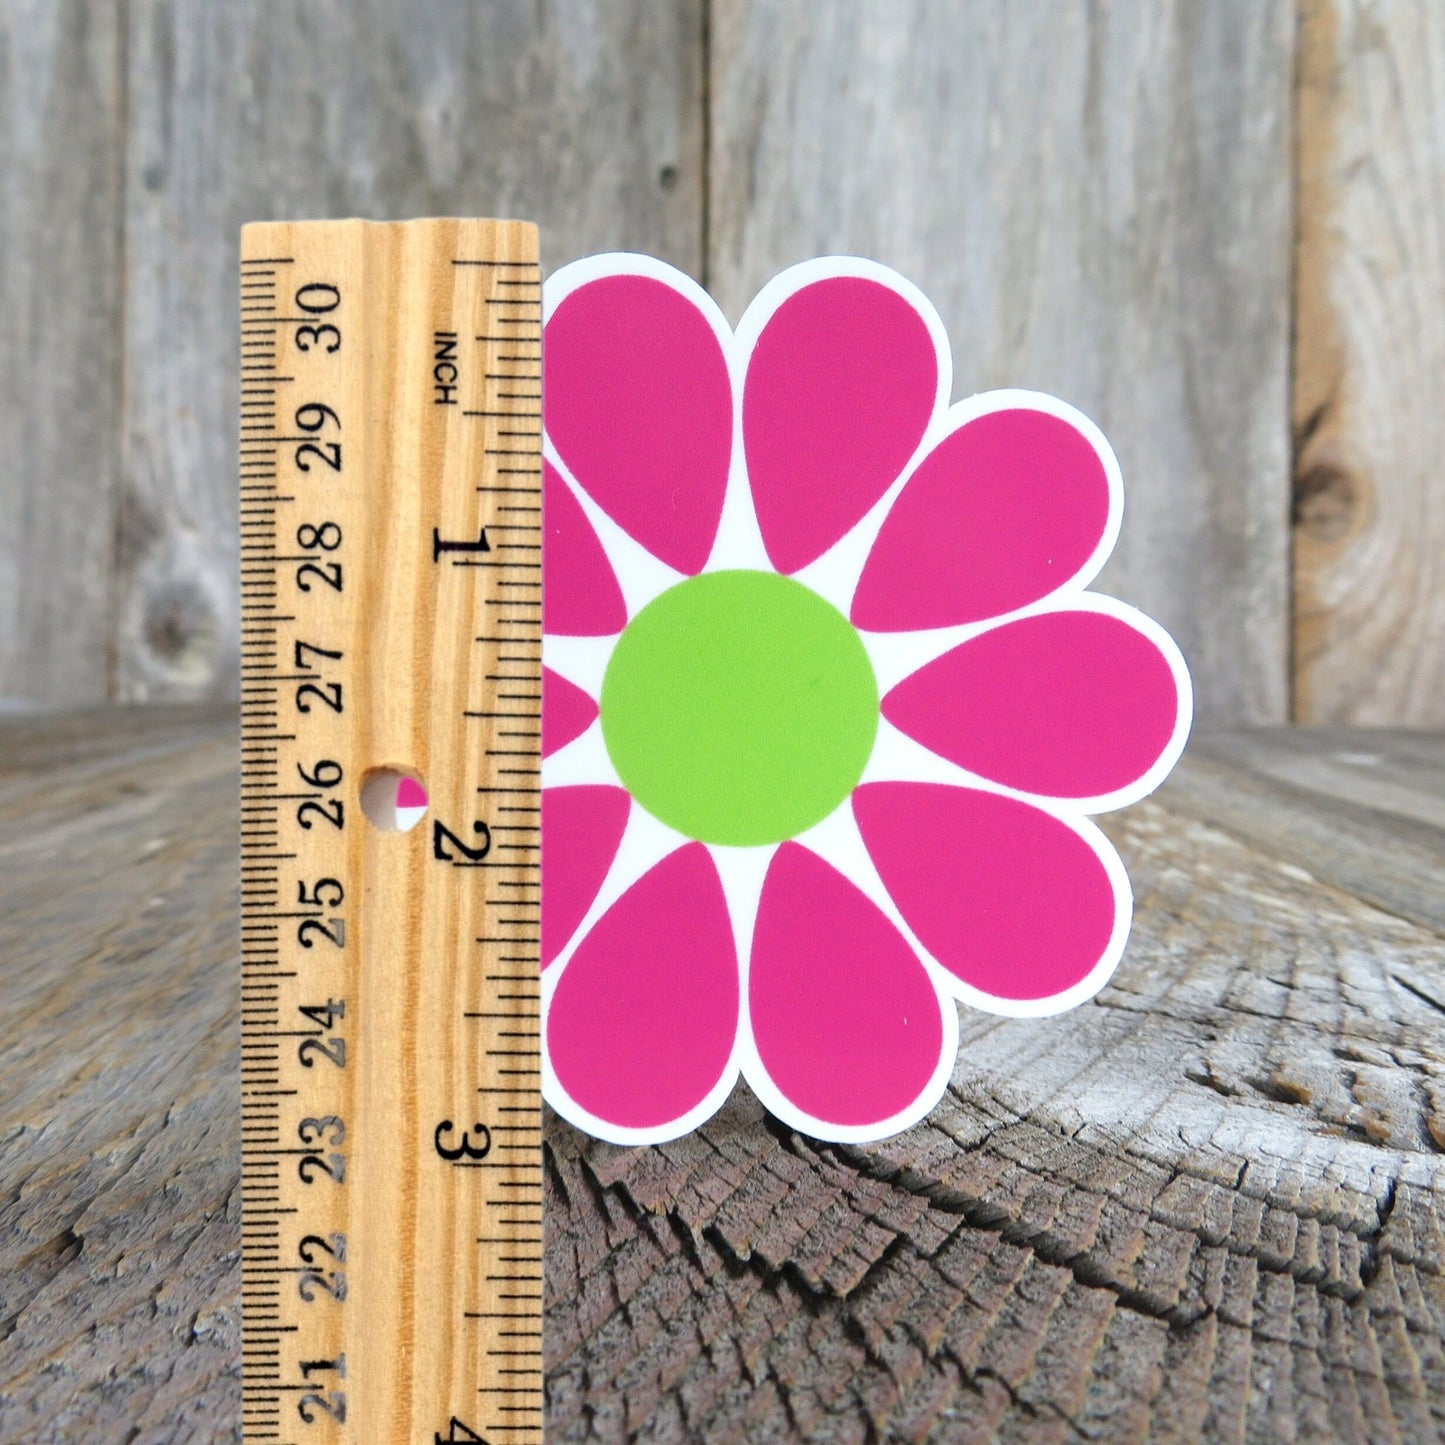 Daisy Flower Sticker Pink and Green Retro Style Waterproof Full Color Groovy 70's Flower Power